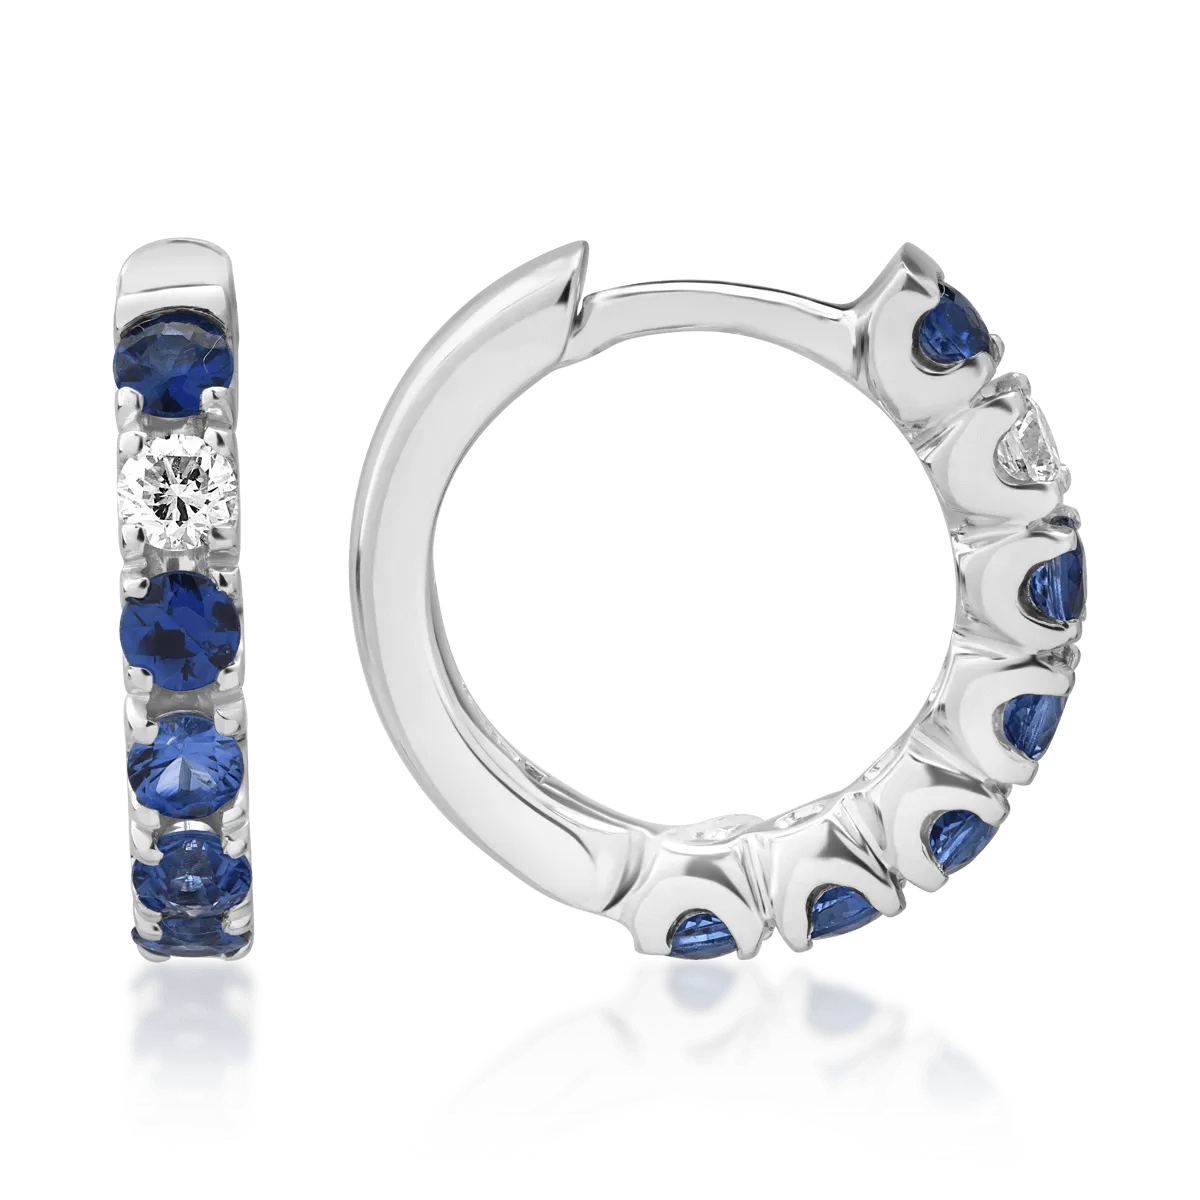 18K white gold earrings with 0.8ct sapphires and 0.1ct diamonds